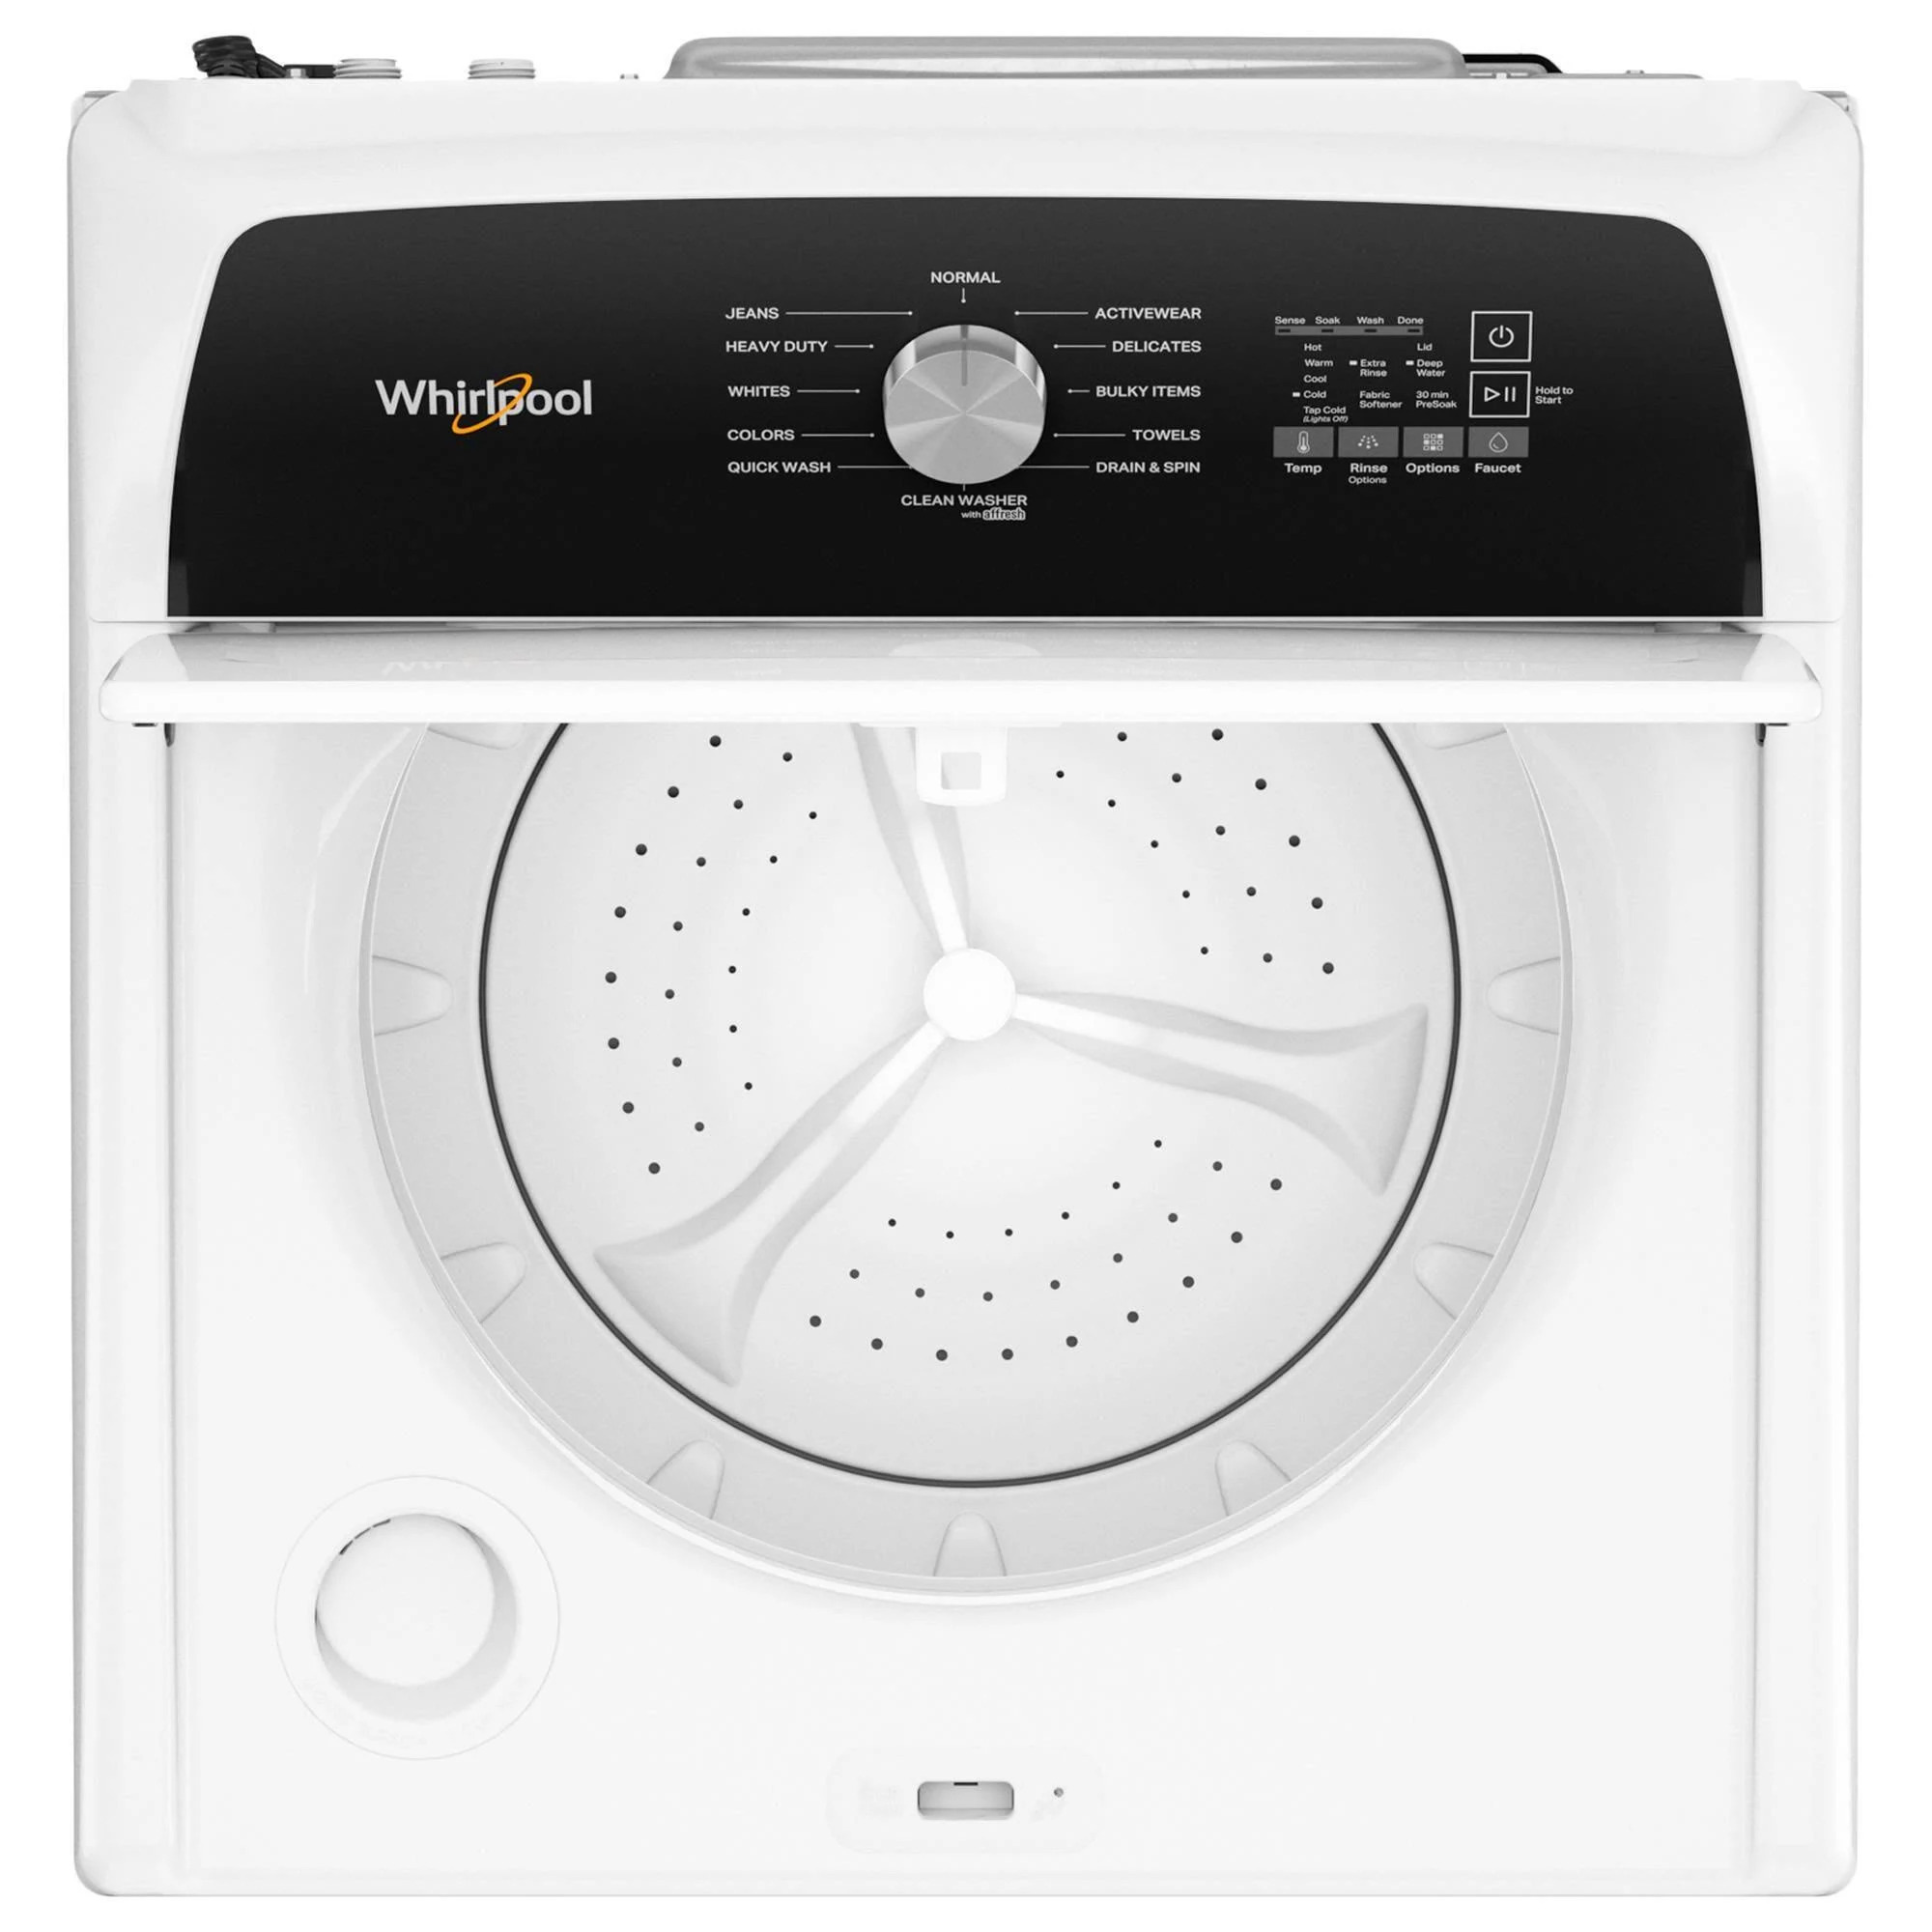 How To Fix The Error Code F01 For Whirlpool Washer